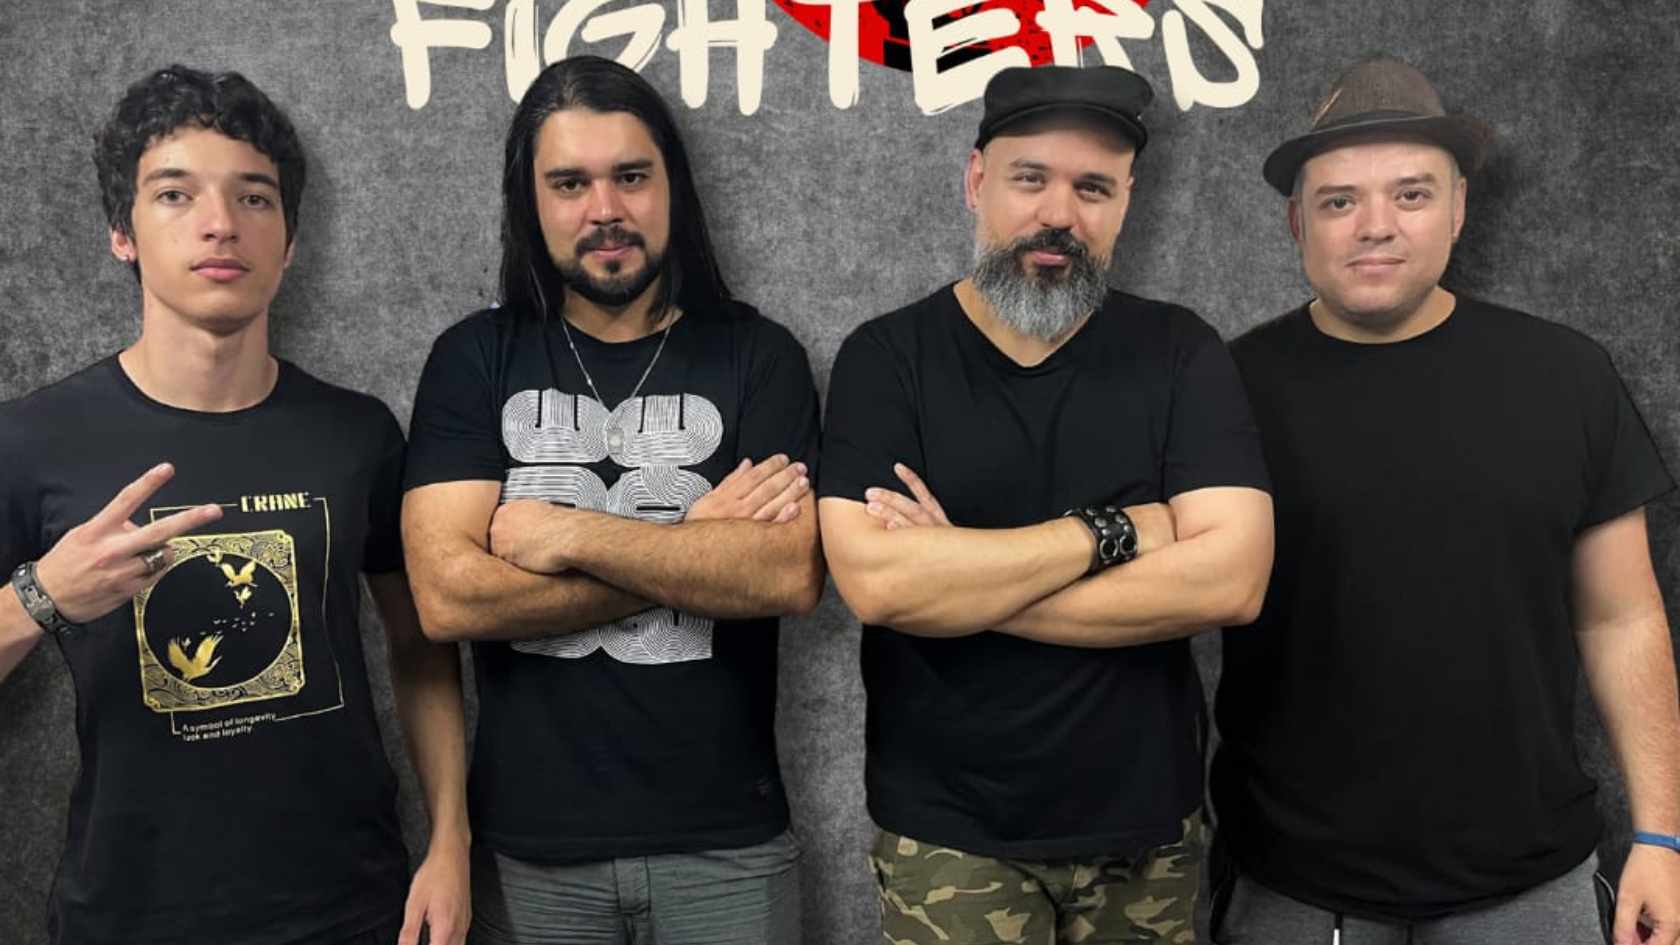 Red Fighters